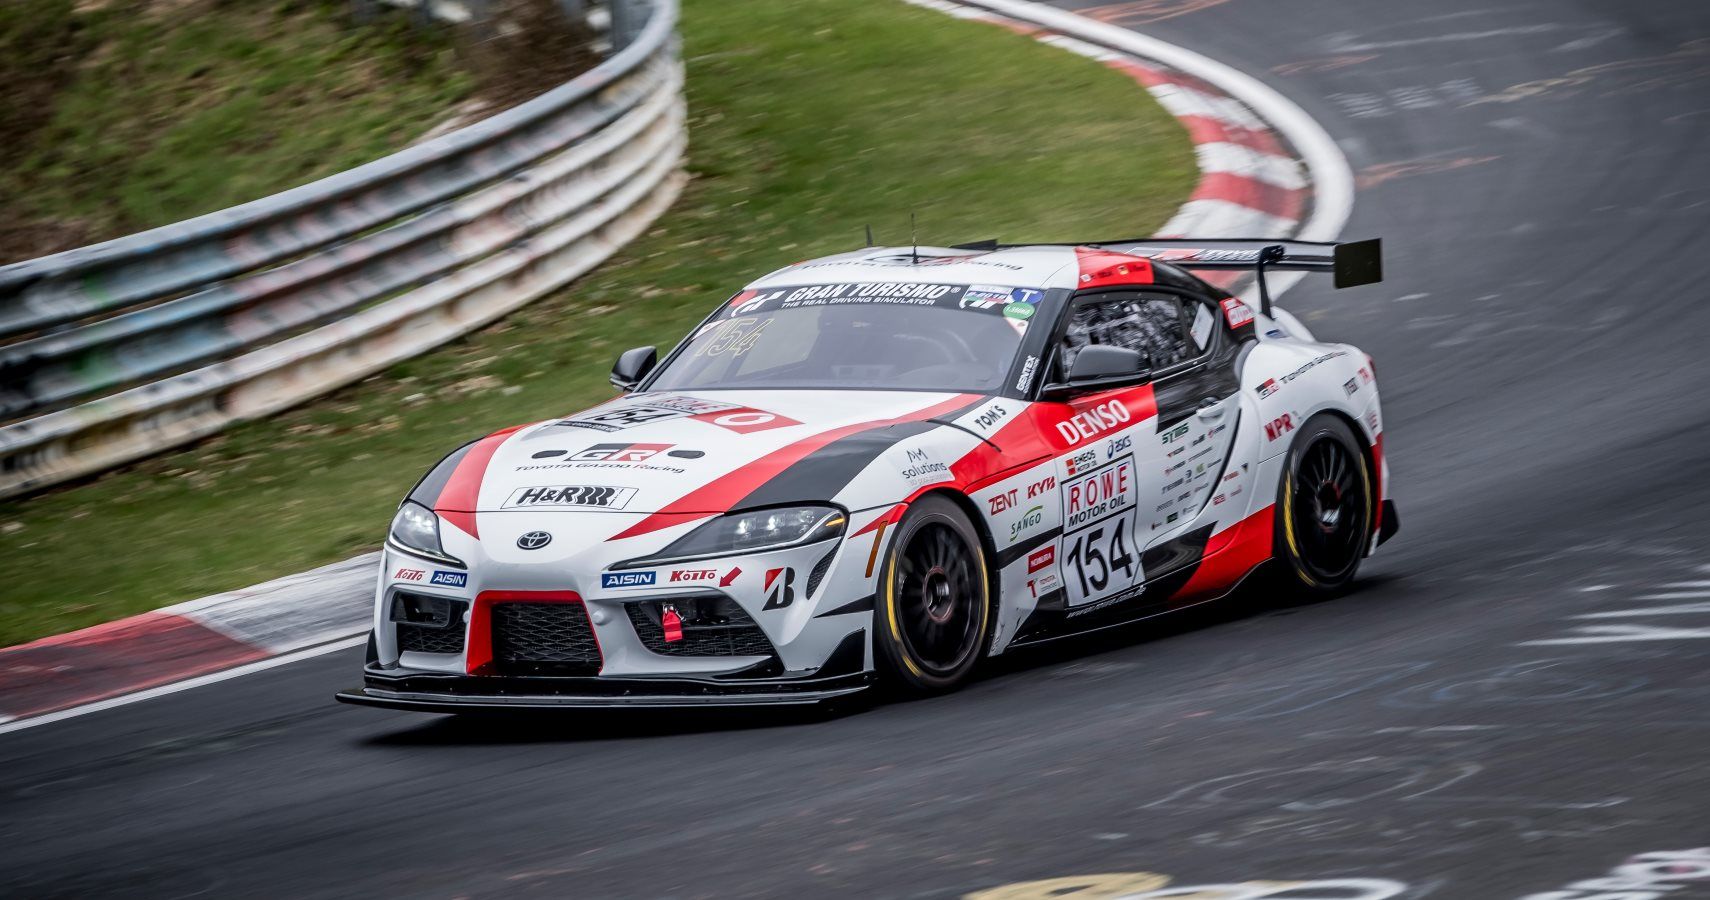 2020 Toyota Supra To Race At Germany's Nurburgring